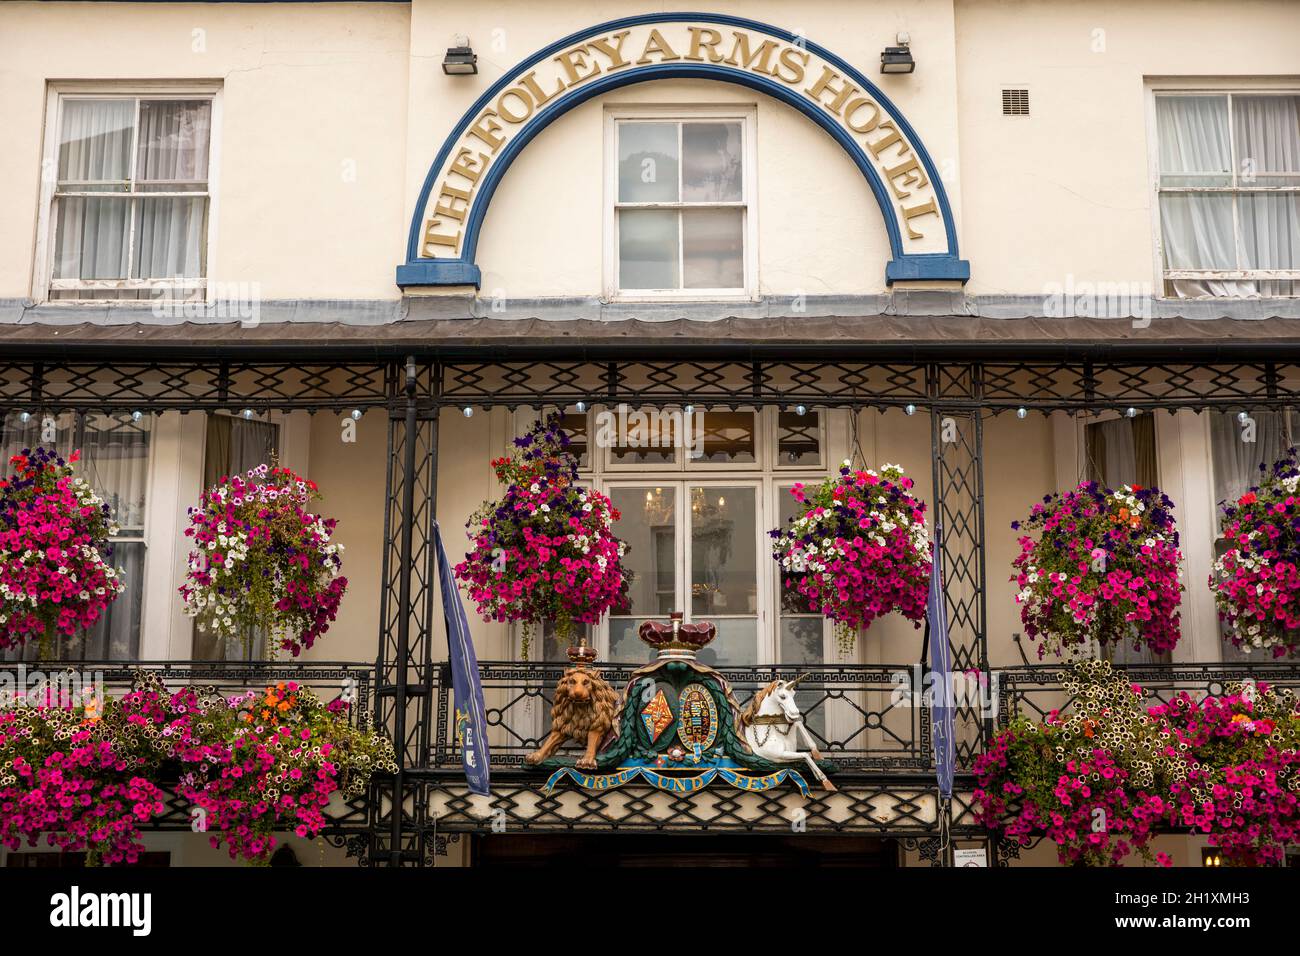 UK, England, Worcestershire, Great Malvern, Worcester Road, Wetherspoons Foley Arms Hotel, floral façade and Princess Mary of Teck  (Queen Mary) Coat Stock Photo